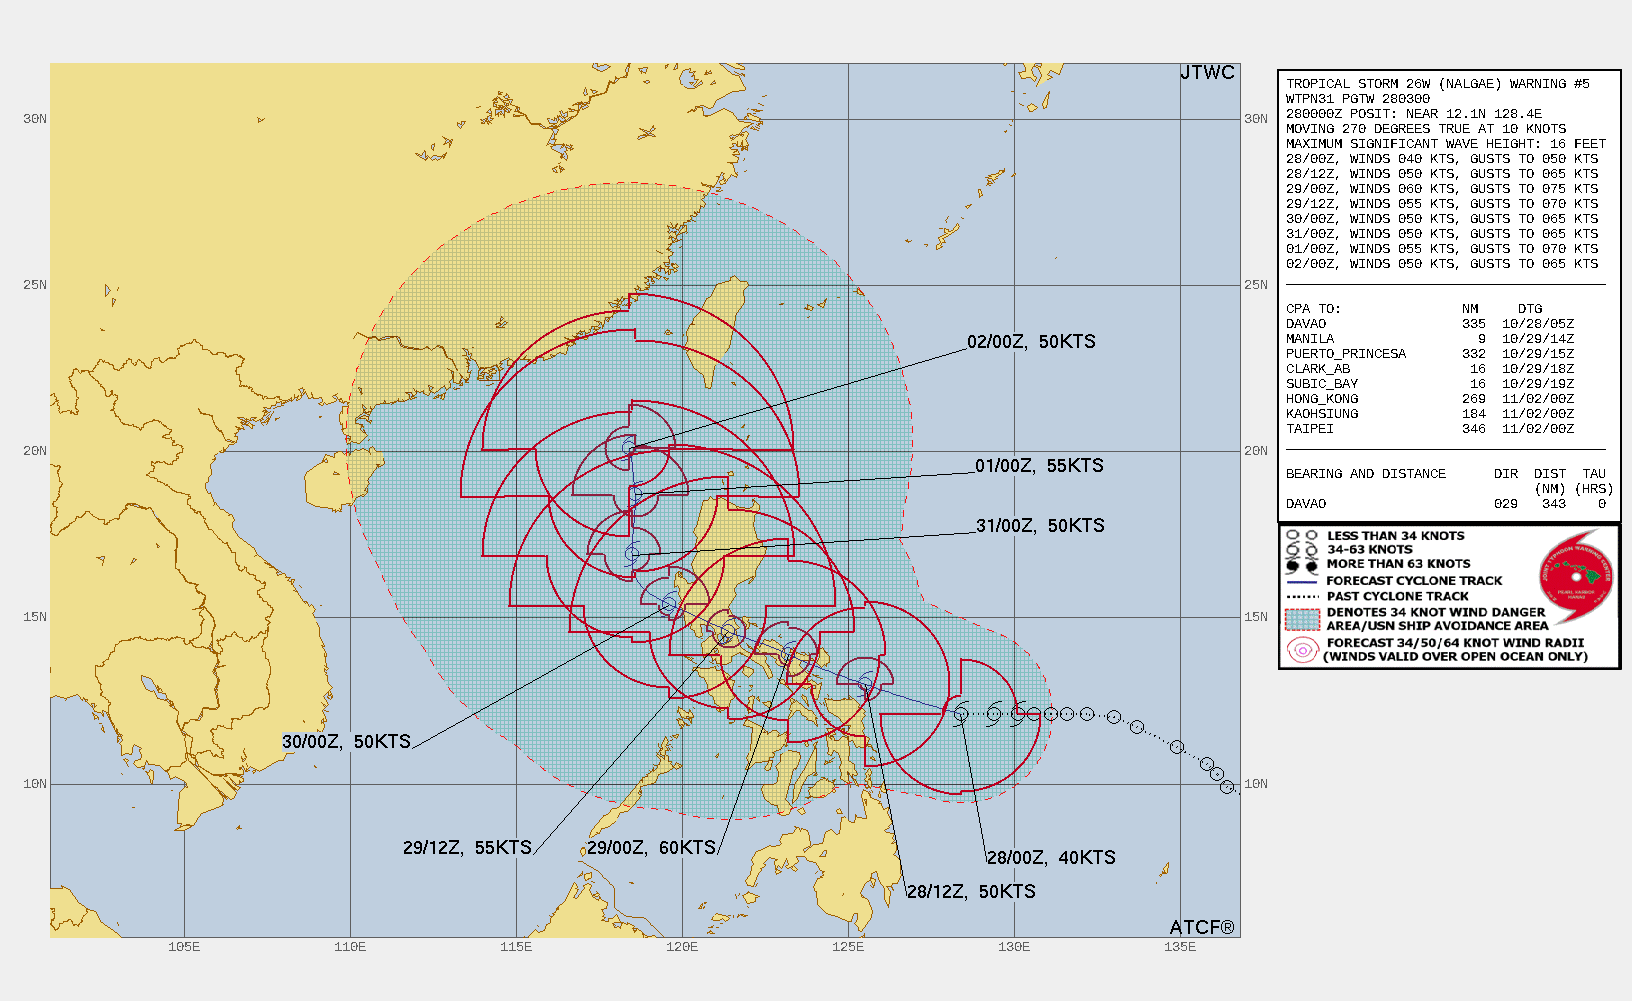 FORECAST REASONING.  SIGNIFICANT FORECAST CHANGES: THERE ARE NO SIGNIFICANT CHANGES TO THE FORECAST FROM THE PREVIOUS WARNING.  FORECAST DISCUSSION: NOW THAT THE LLCC IS TRACKABLE, IT IS APPARENT THAT TS NALGAEâ€™S CURRENT POSITION REMAINS SOUTH OF PRIOR FORECASTS, AND IS PICKING UP SPEED AS IT MOVES CLOSER TO CENTRAL PHILIPPINES. AS A RESULT, THE CURRENT TRACK HAS SHIFTED SOUTH, WITH LANDFALL NOW EXPECTED BEFORE TAU 24 OVER THE BICOL REGION. THE SHORTENED TIMELINE SHOULD LIMIT FURTHER INTENSIFICATION TO A PEAK OF 60 KNOTS. TS 26W WILL TRACK NORTHWARD OVER SOUTHERN LUZON BEFORE ENTERING THE SOUTH CHINA SEA. A WEAKNESS IN THE STEERING RIDGE WILL RESULT IN A TURN TO THE NORTH BY TAU 72. MODEL GUIDANCE INDICATES THE TRACK WILL SLOW AFTER TAU 96 AS THE RIDGE RE-BUILDS AHEAD OF  TRACK. THERE IS A GREAT DEAL OF UNCERTAINTY AT THIS POINT AS  COMPETING STEERING INFLUENCES WILL DICTATE WHETHER NALGAE MOVES INTO  NORTHEASTERLY SURGE FLOW AND BEGINS TO WEAKEN AND TURN TO THE  NORTHWEST, OR WHETHER IT FOLLOWS THE EASTERN RIDGE ASSUMES CONTROL  AND TAKES TS 26W TO THE NORTHEAST.